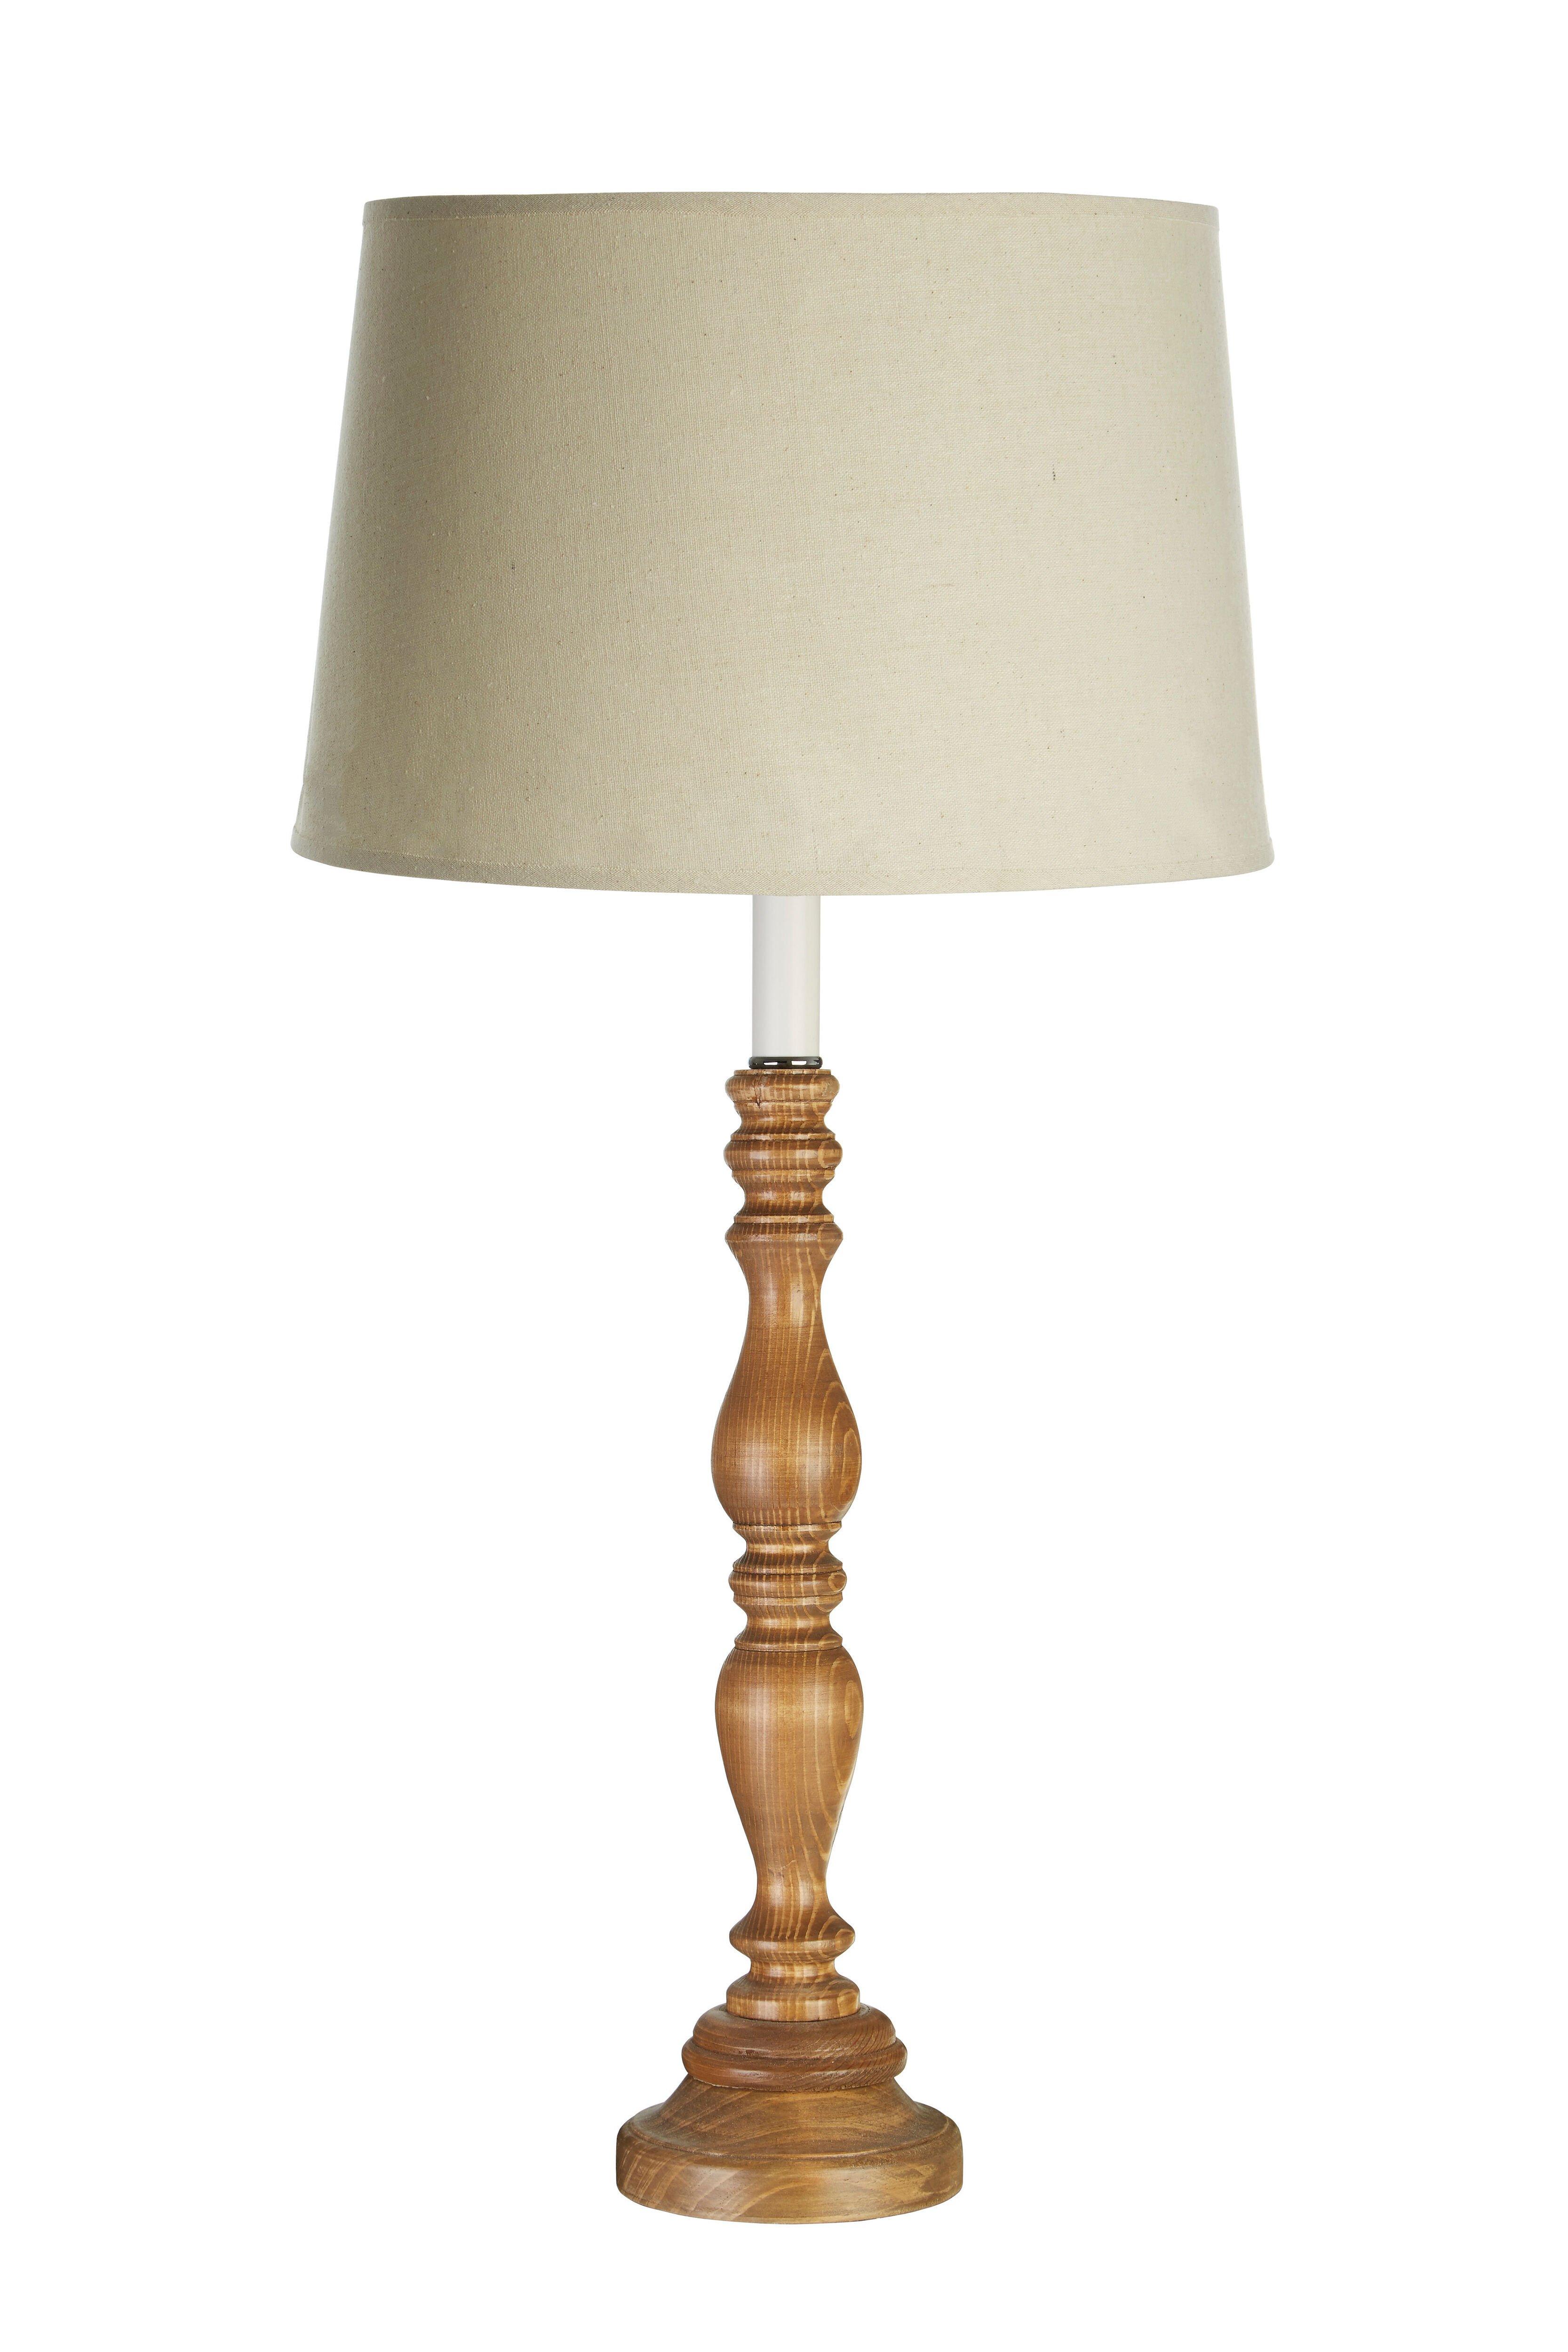 Interiors by Premier Candle Table Lamp with Round Base